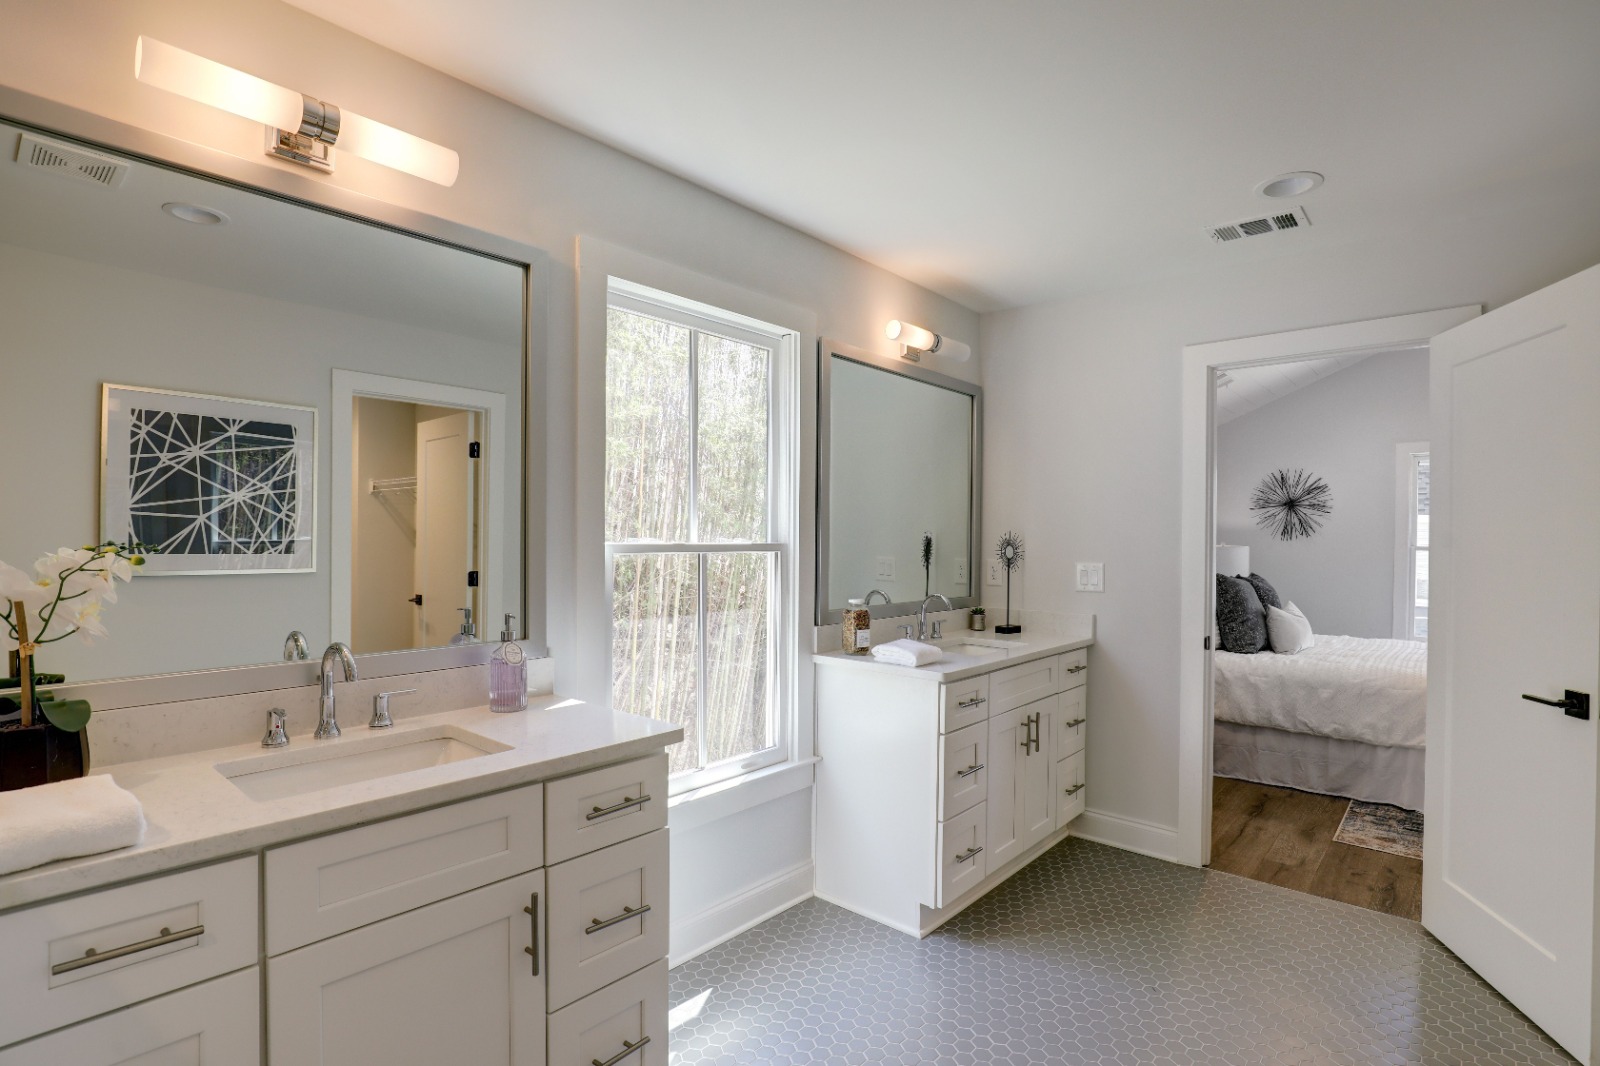 How Much Does It Cost To Renovate Your Bathroom In Hoboken Nj?